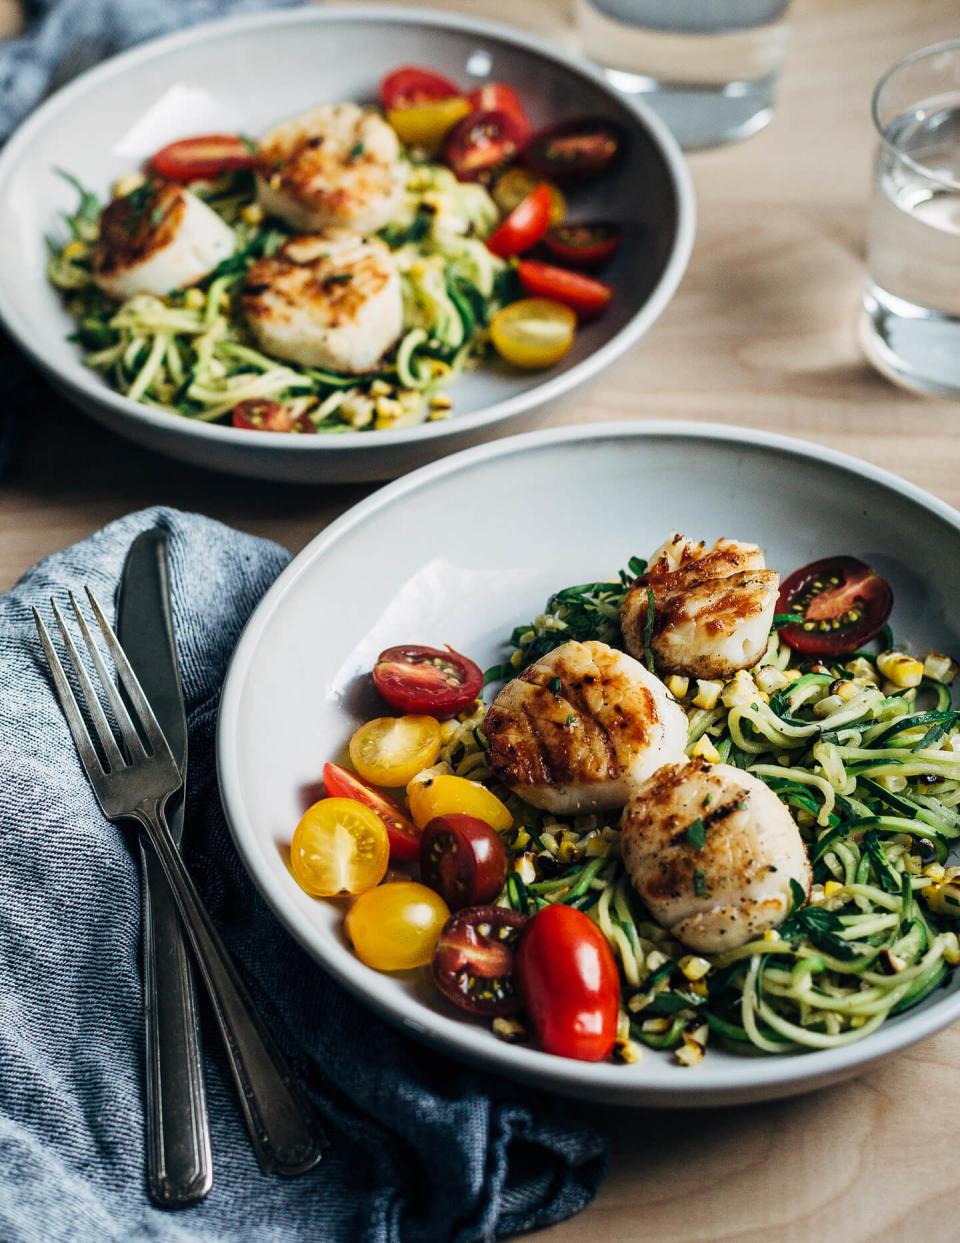 Grilled Scallops With Herbed Zucchini Noodles and Charred Corn From Brooklyn Supper